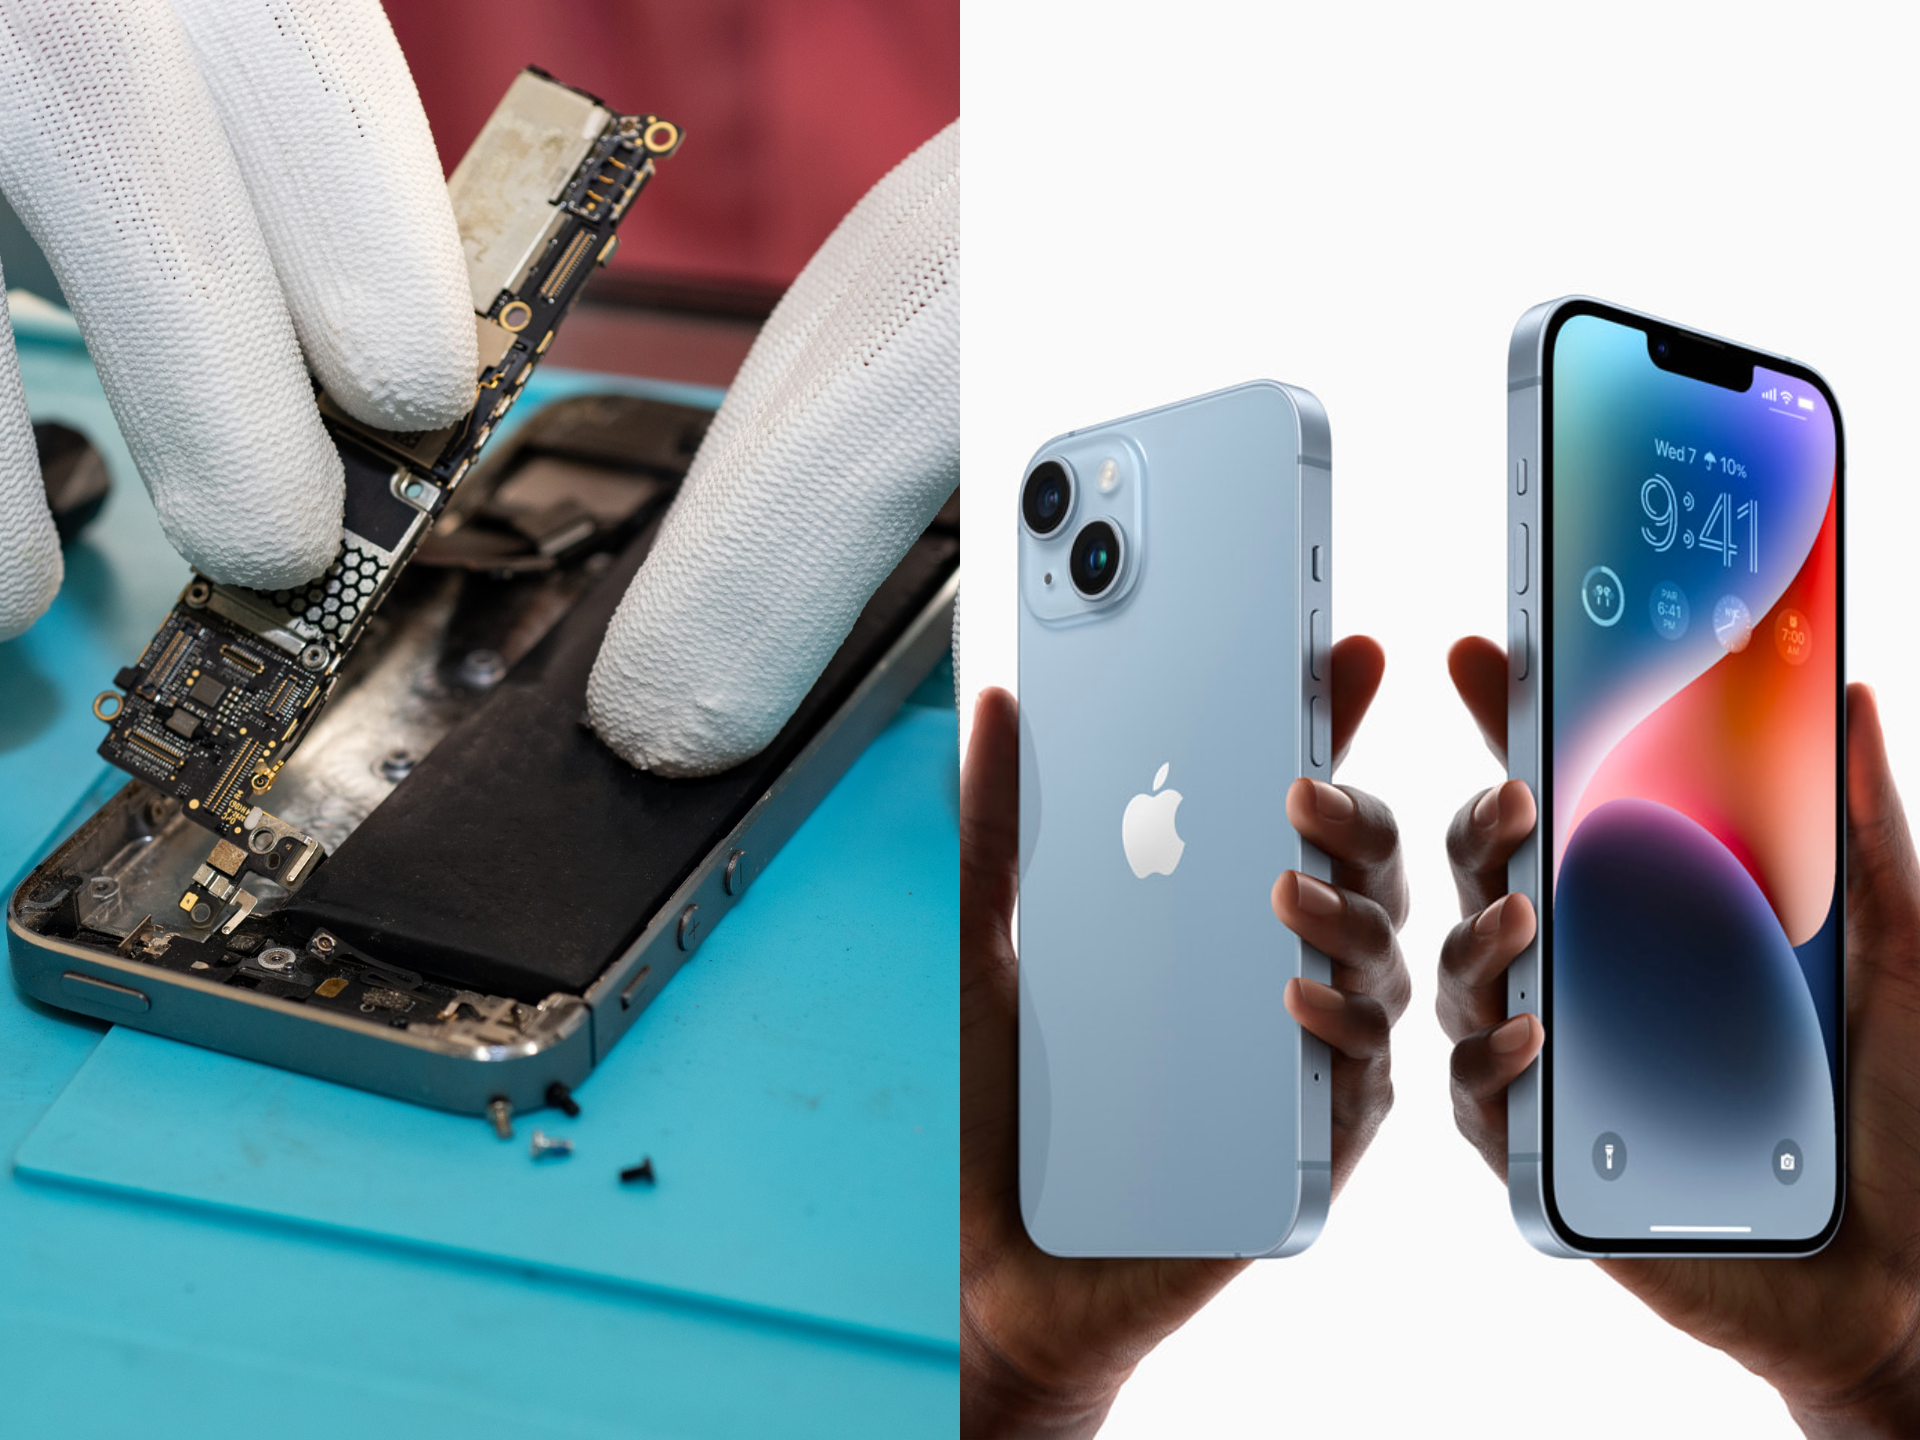 An iPhone being repaired on the left, and hands holding up the iPhone 14 and iPhone 14 Plus on the right